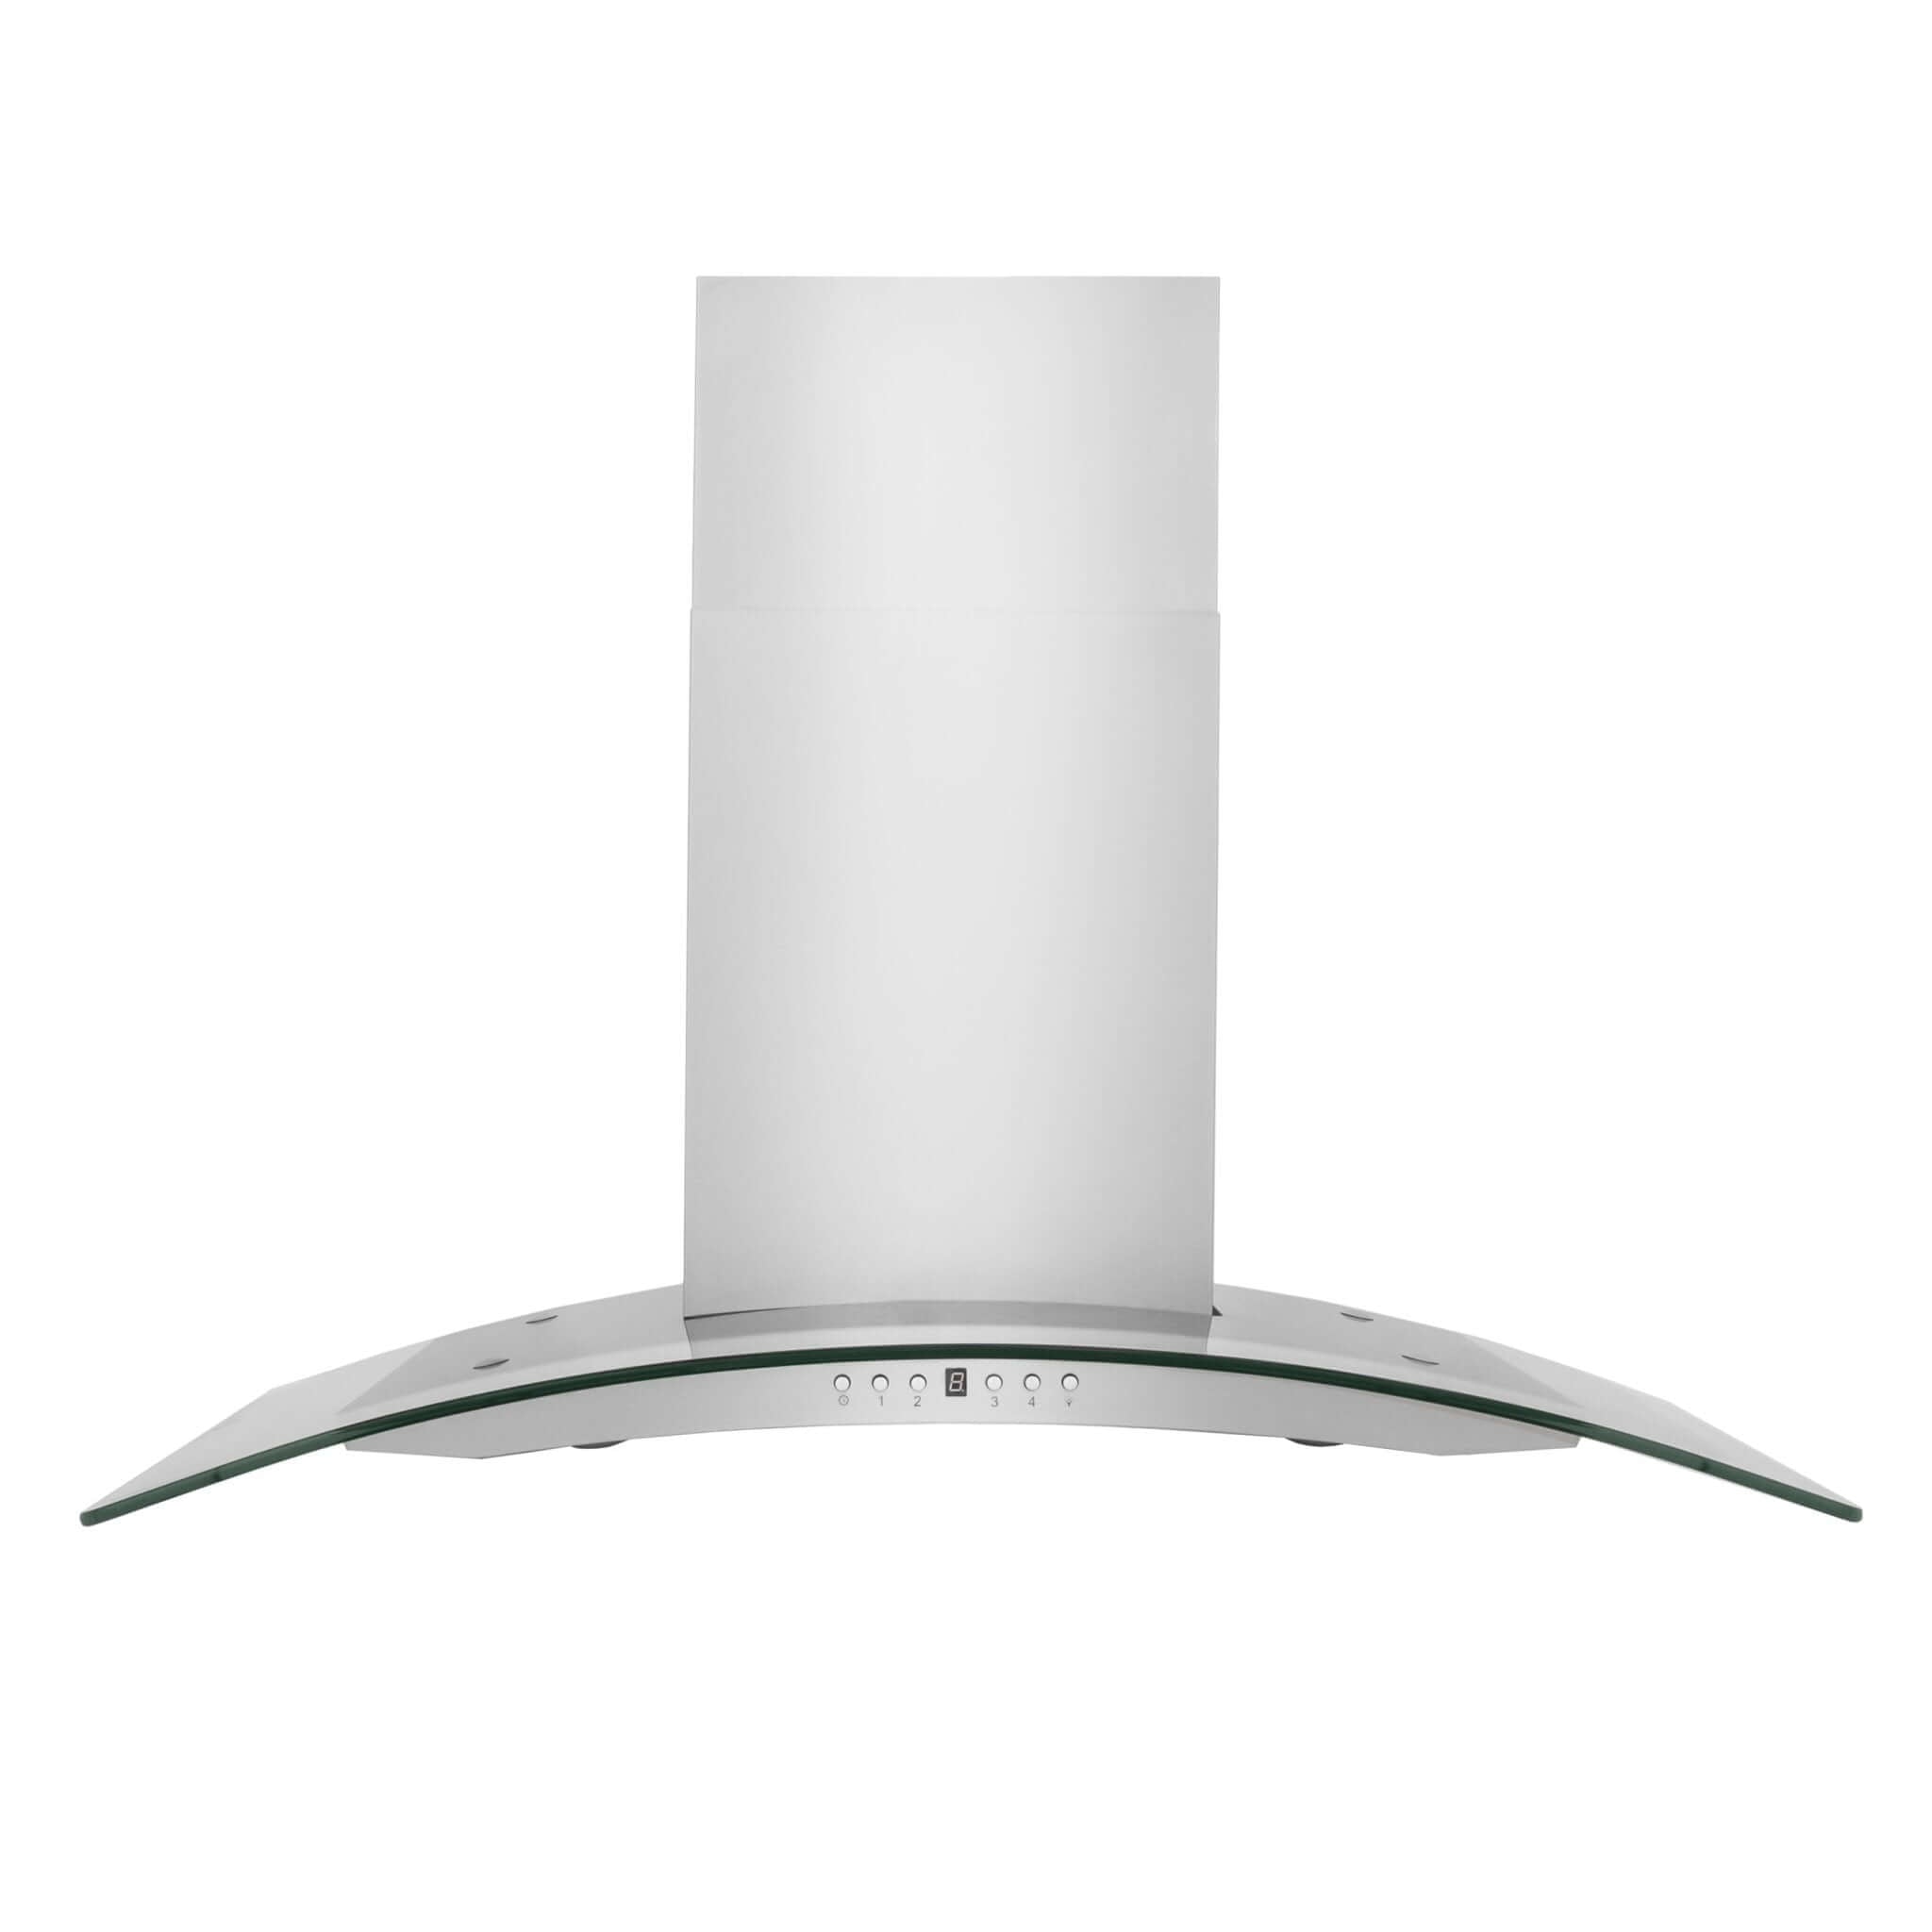 ZLINE 48" Convertible Vent Convertible Vent Wall Mount Range Hood in Stainless Steel & Glass (KN4-48)